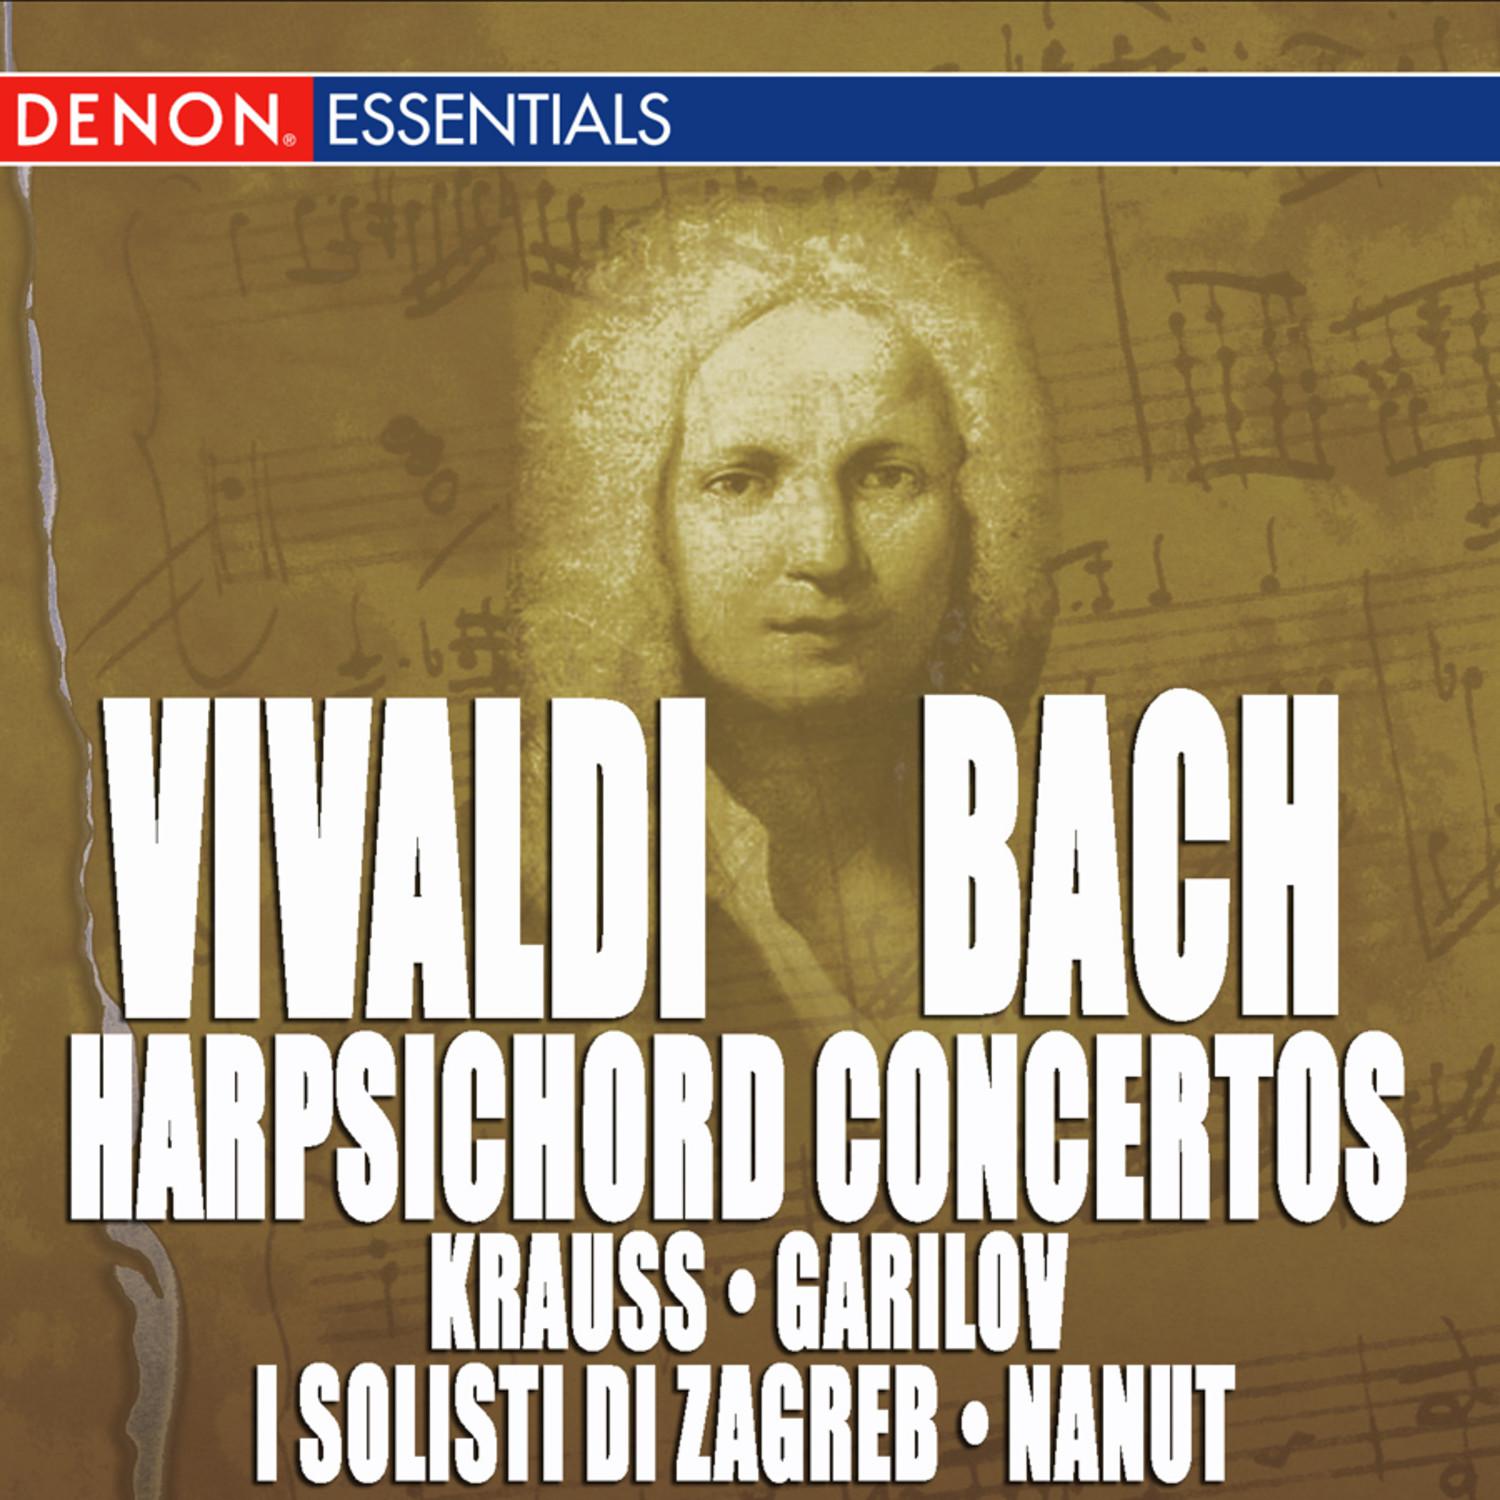 Concerto for Harpsichord and Orchestra in D Minor, BWV 1052: I. Allegro